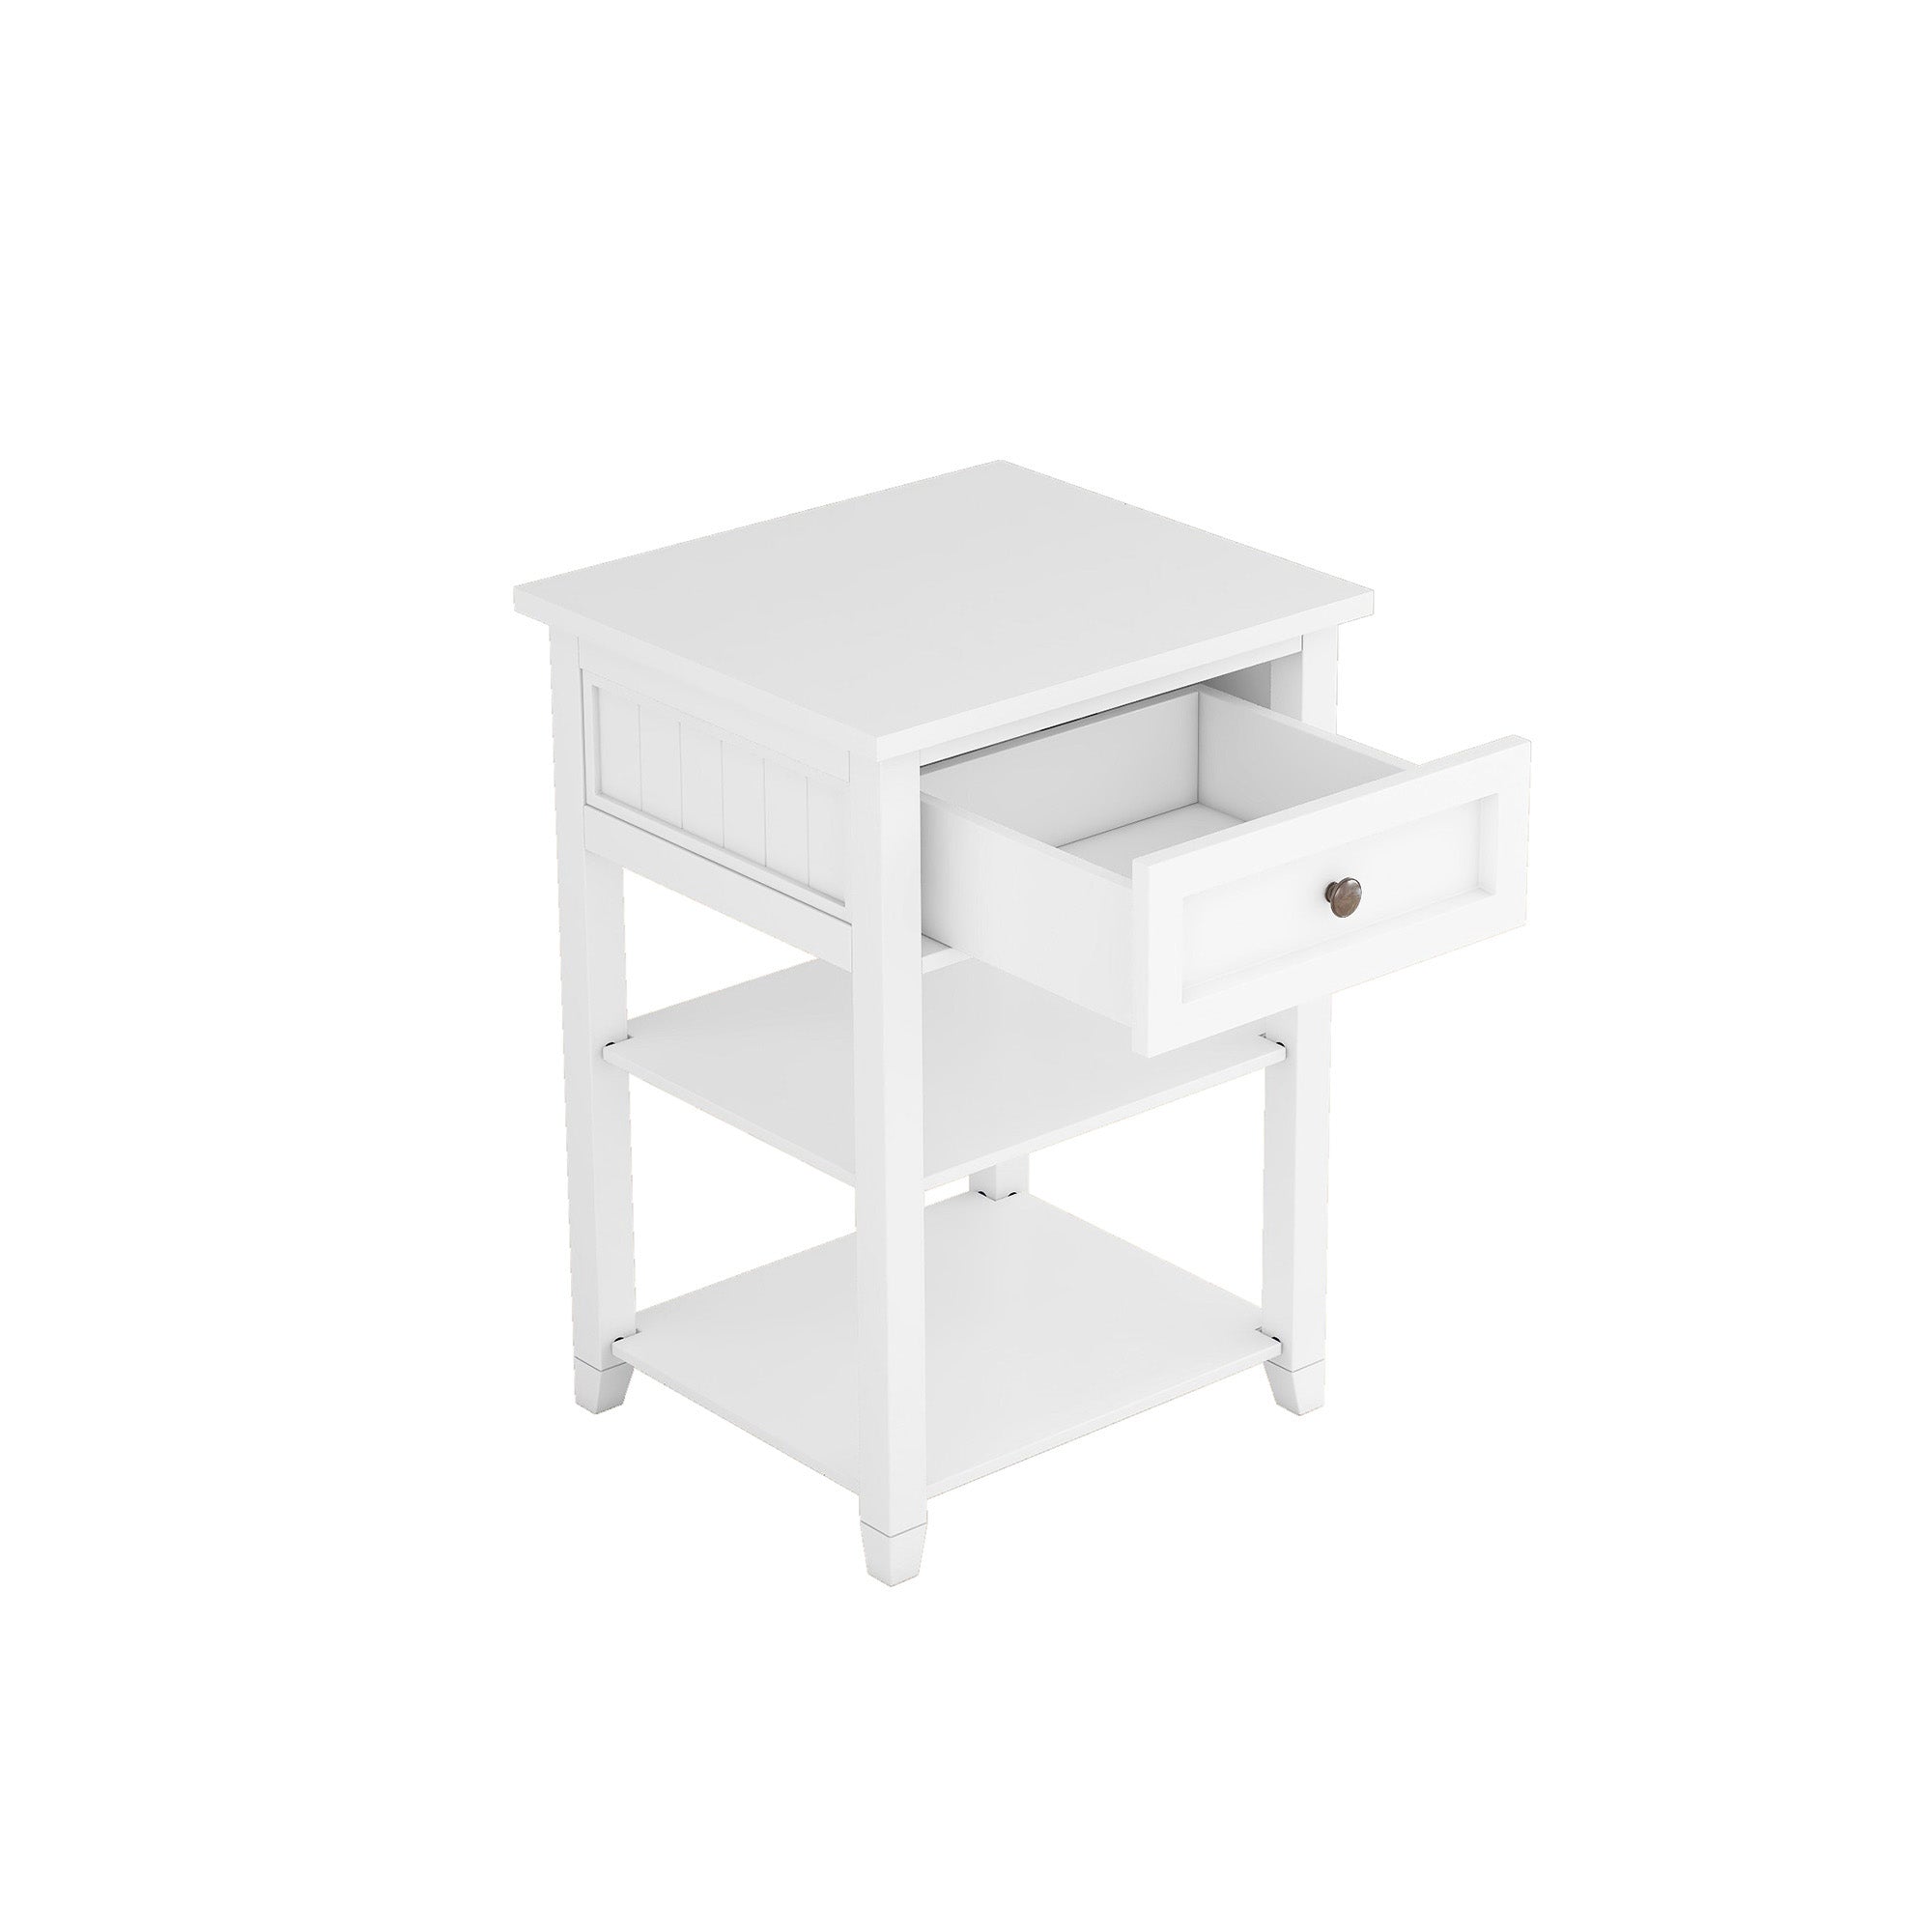 1-Drawer Wood Nightstand with Exterior Shelves